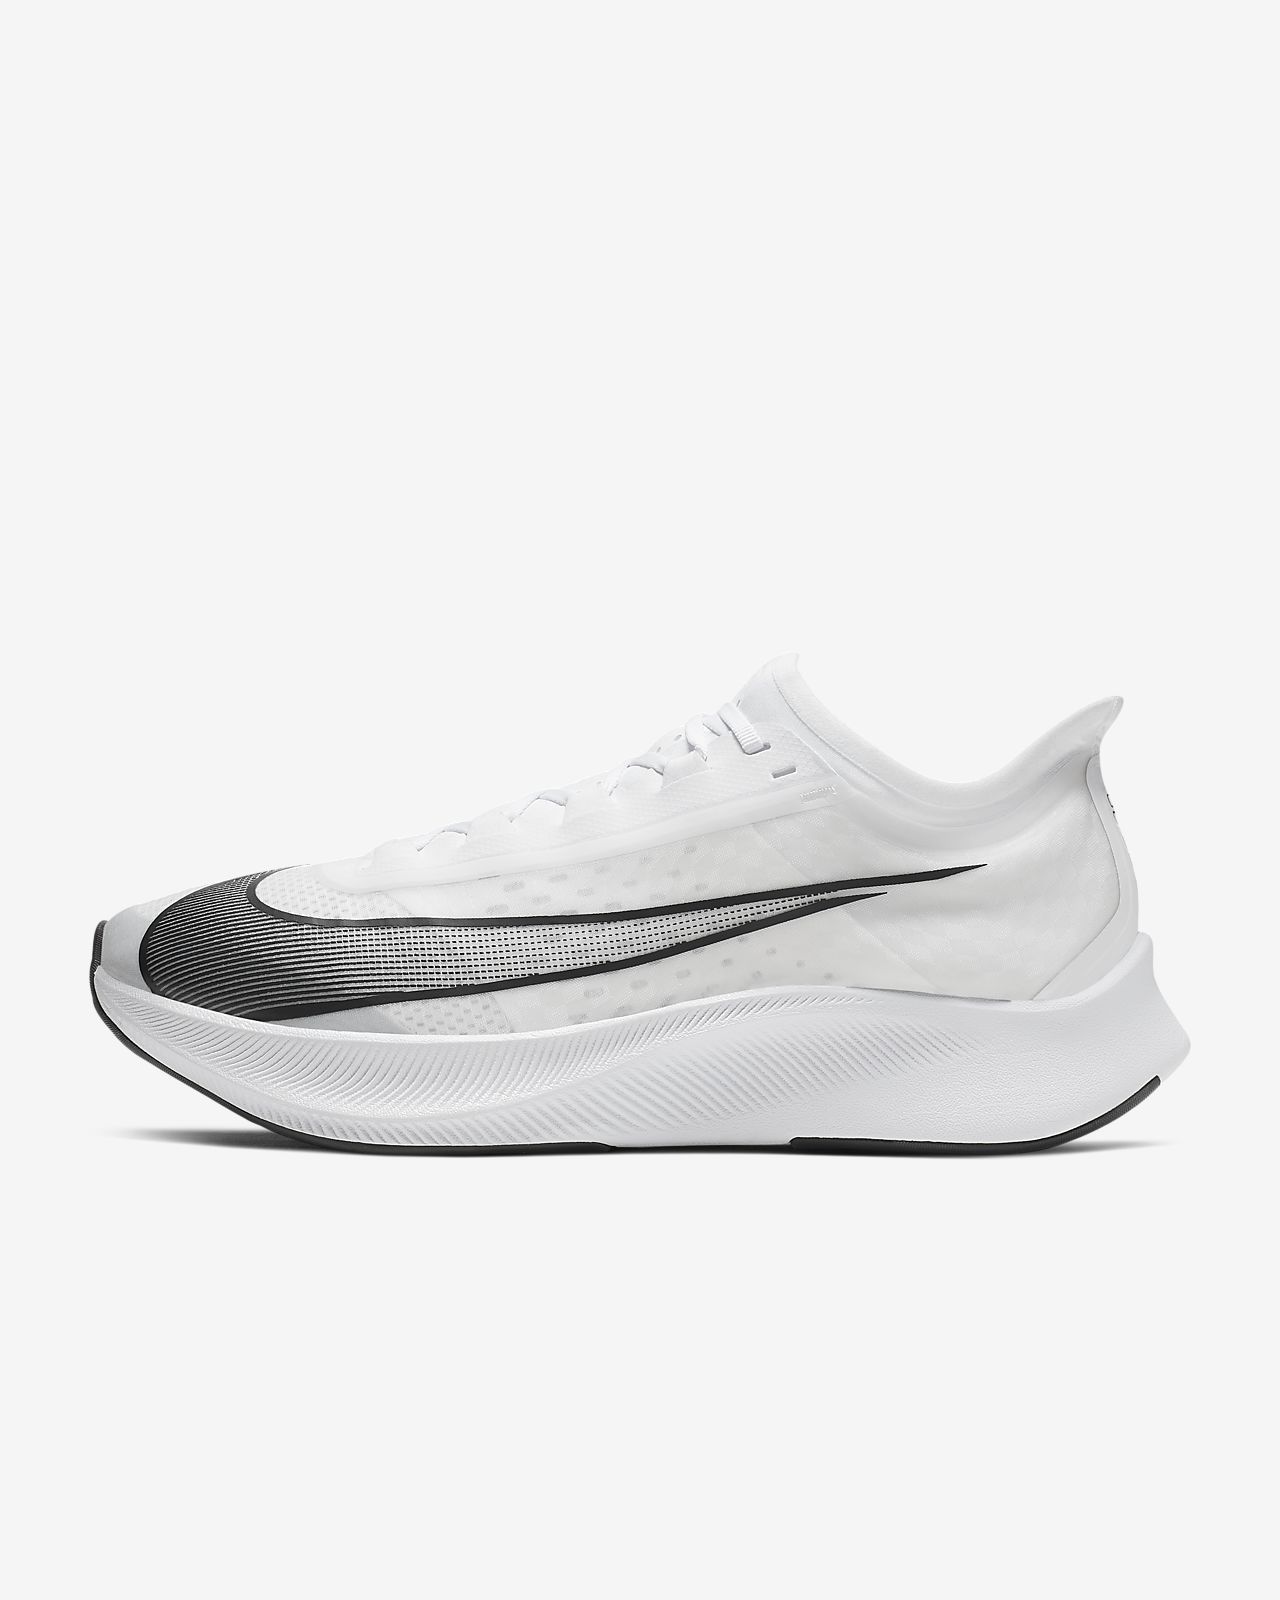 nike vaporfly 4 homme gris